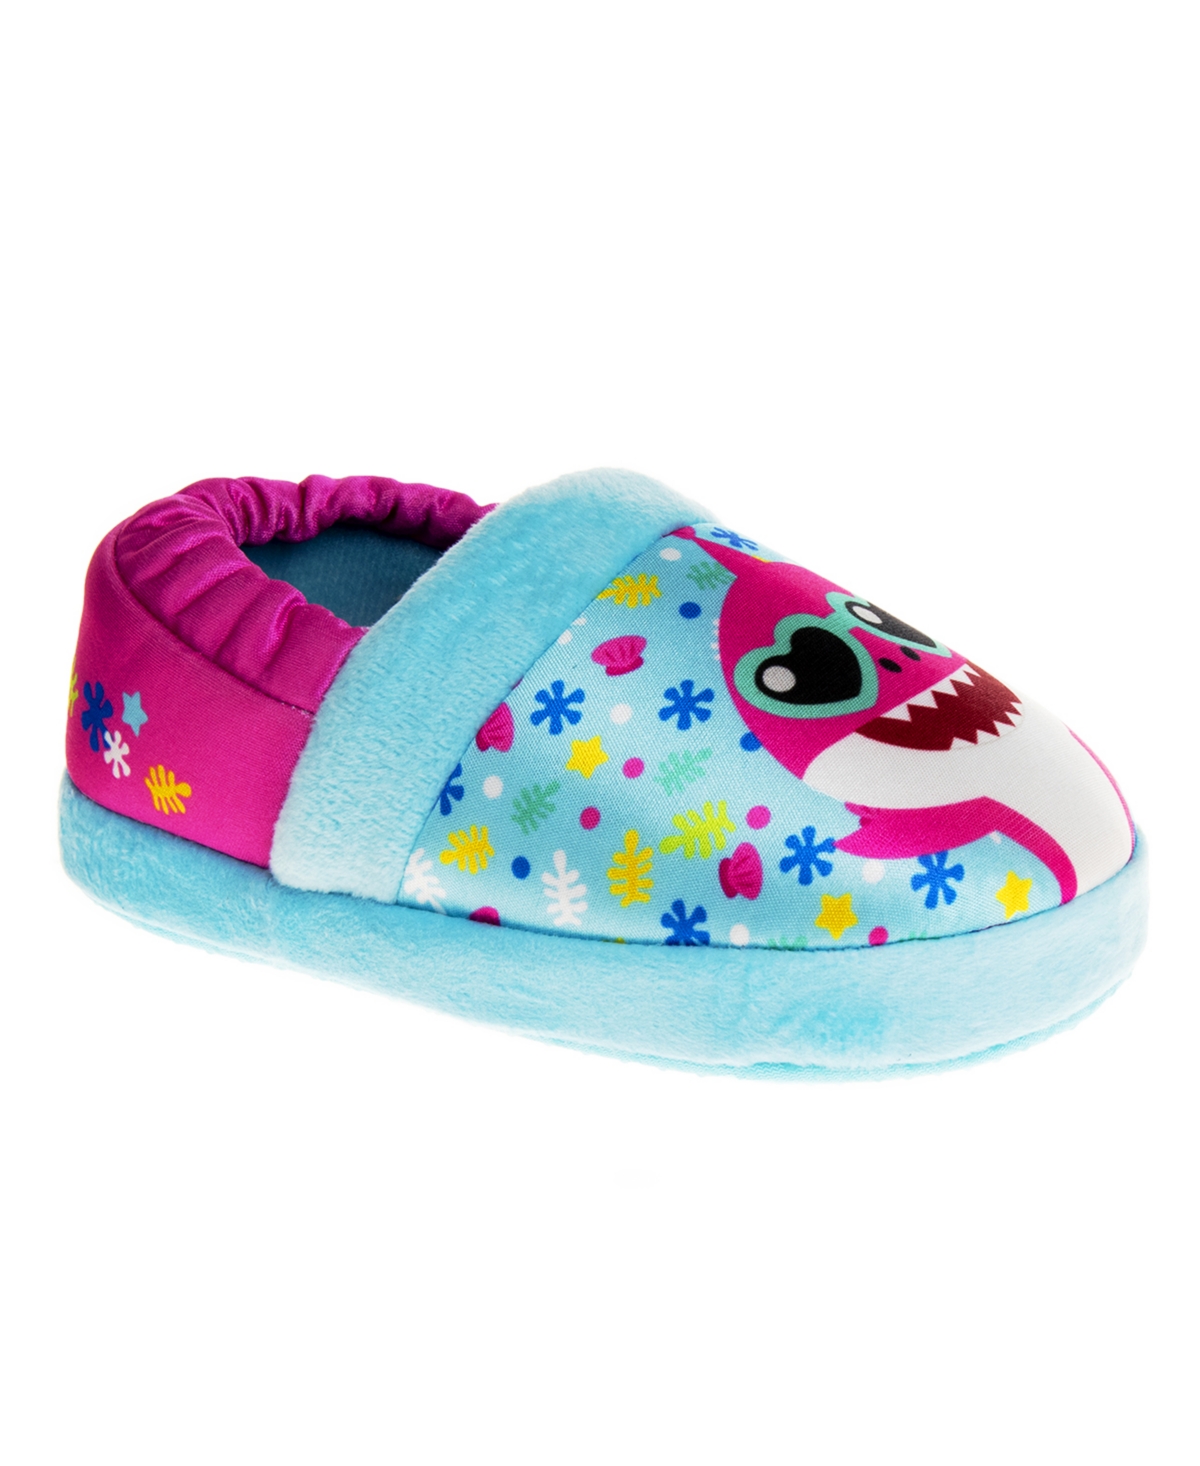 BABY SHARK TODDLER GIRLS COOL AND FRIENDLY DUAL SIZES HOUSE SLIPPERS